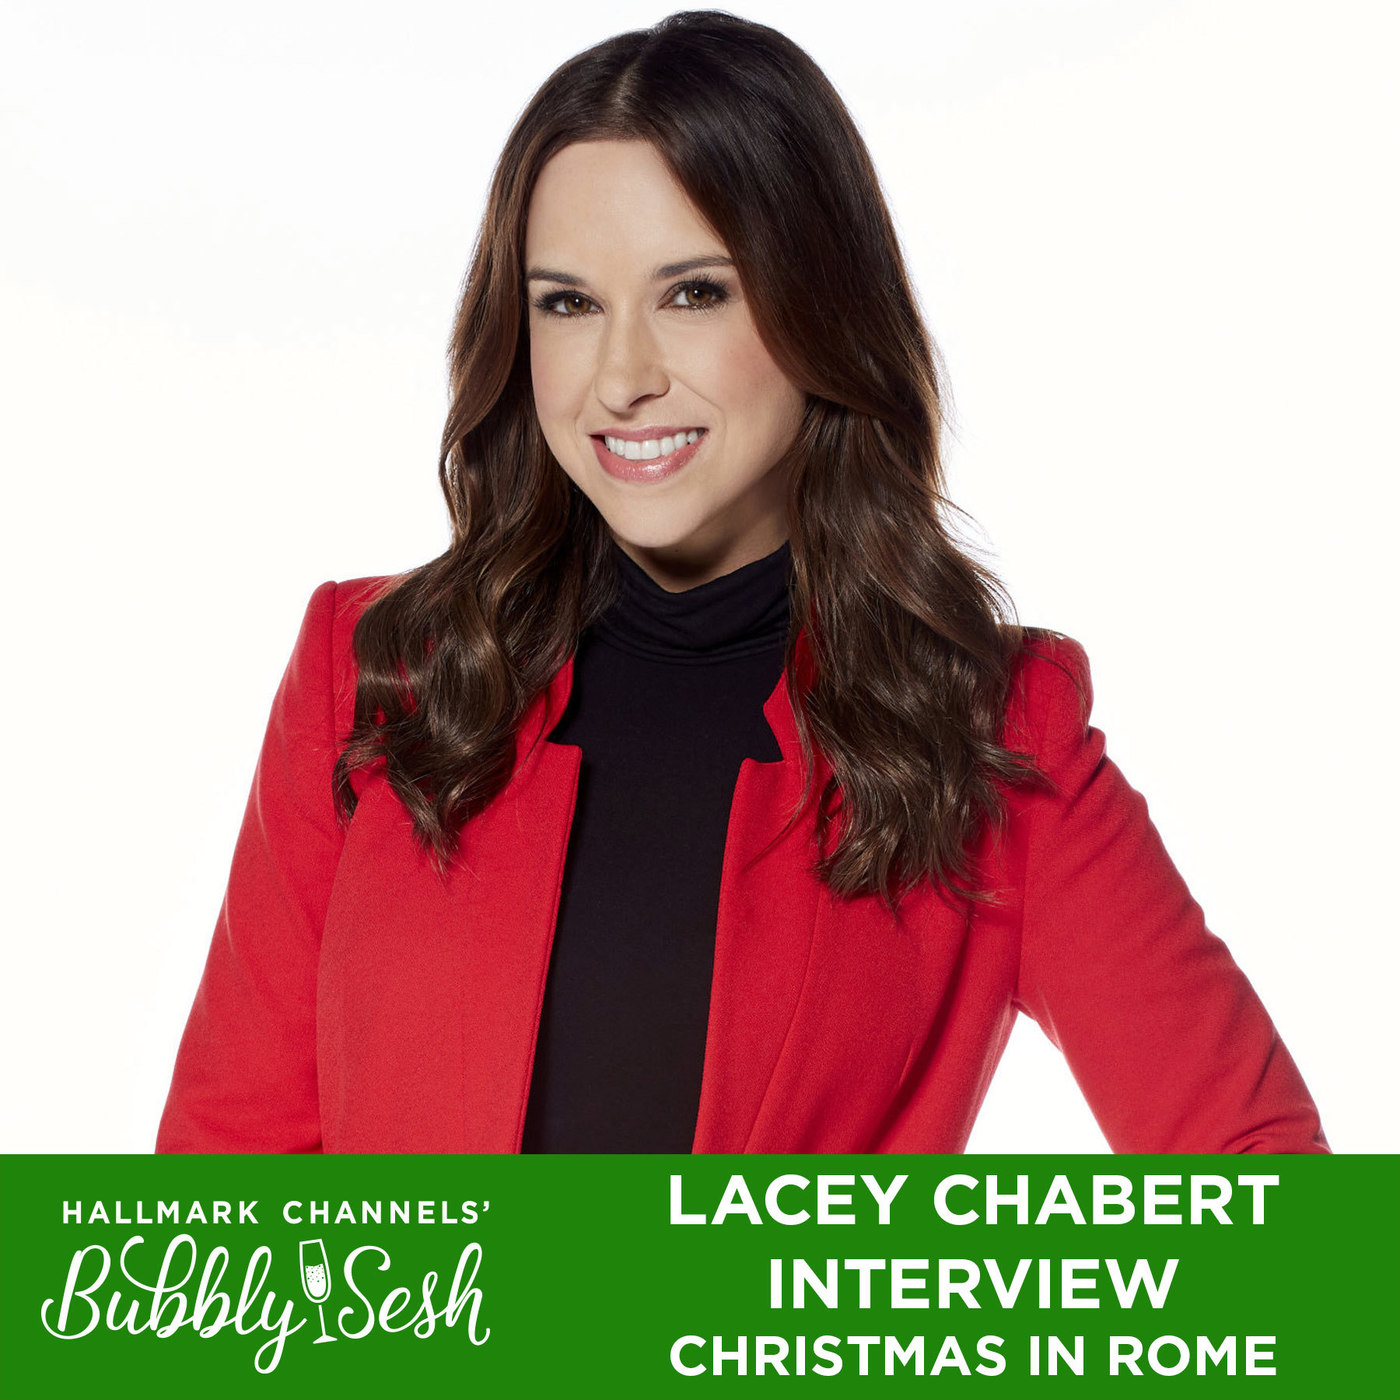 Lacey Chabert Interview, Christmas in Rome 